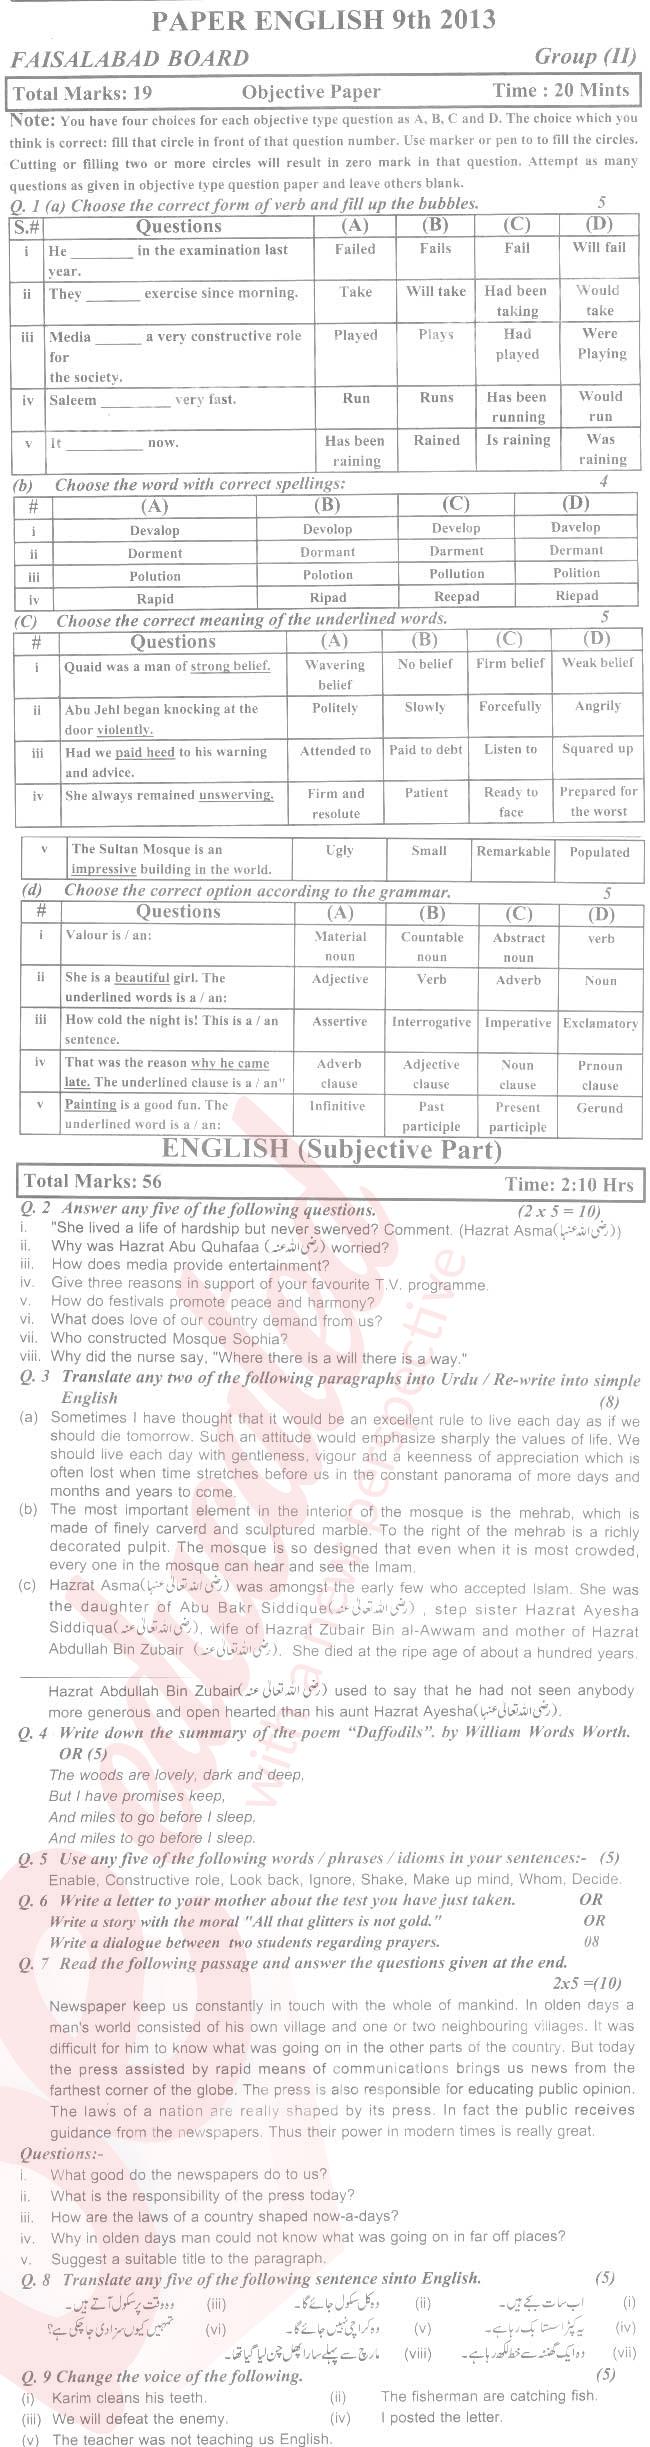 English 9th class Past Paper Group 2 BISE Faisalabad 2013